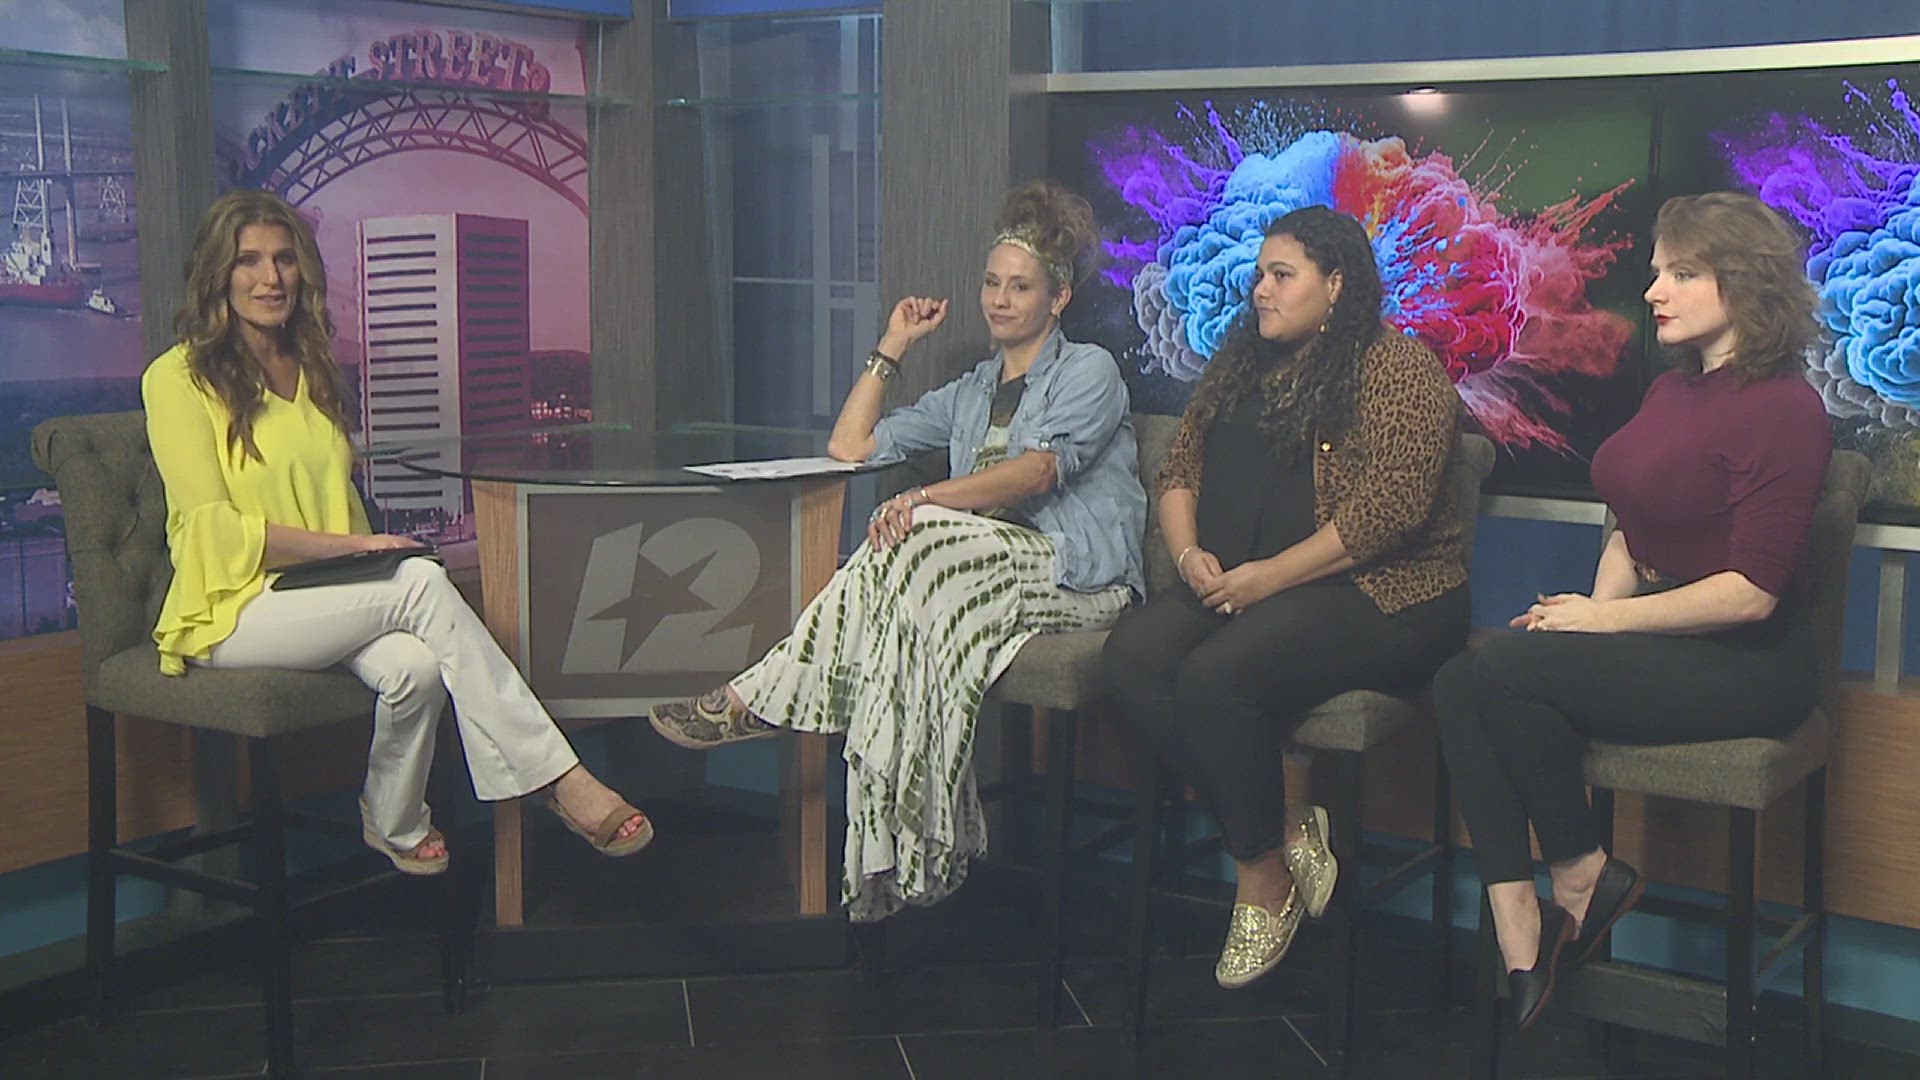 Join Amber Woods and Ala Abbott with the Spindletop Center and Kristen Whitmire of The Art Studio as they discuss the upcoming mental health exhibition.